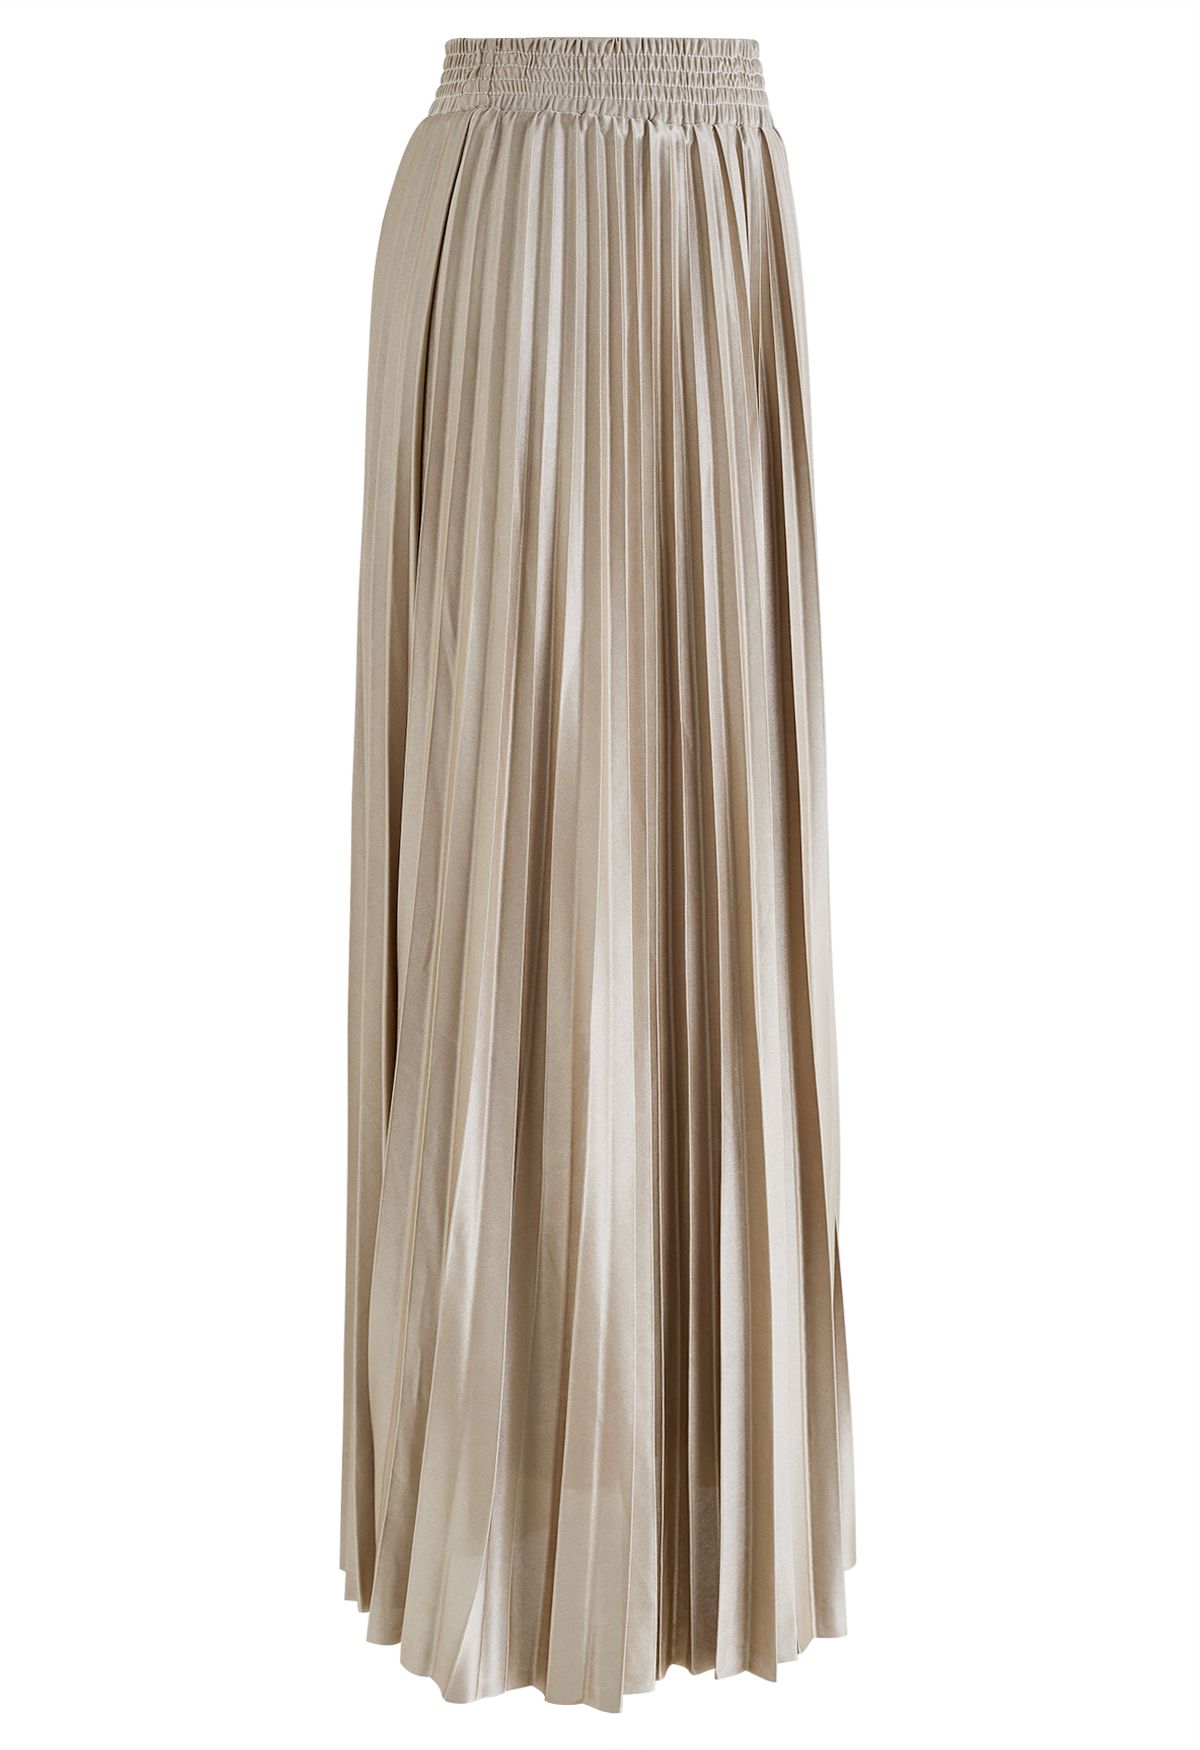 Glossy Pleated Maxi Skirt in Light Tan